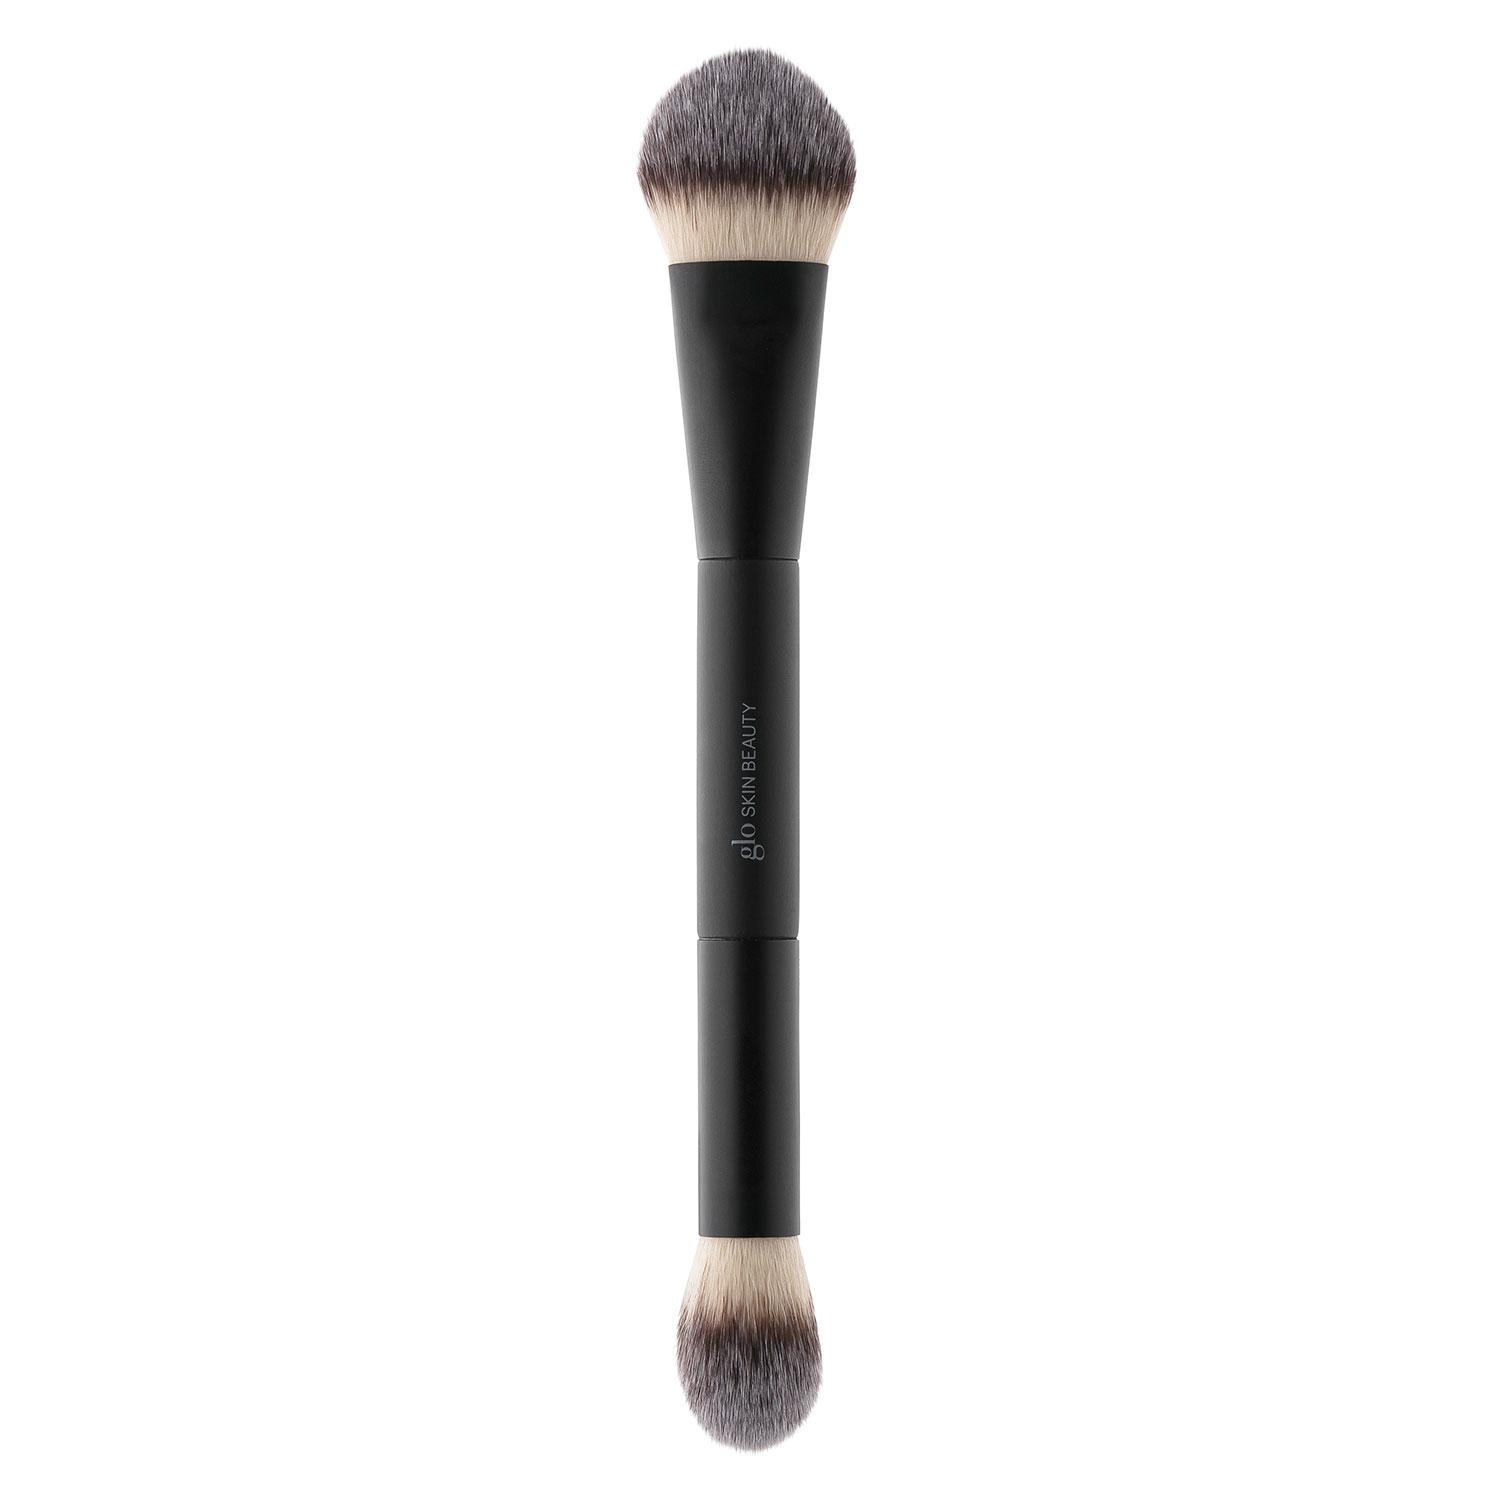 Glo Skin Beauty Tools - Contour/Highlighter Brush